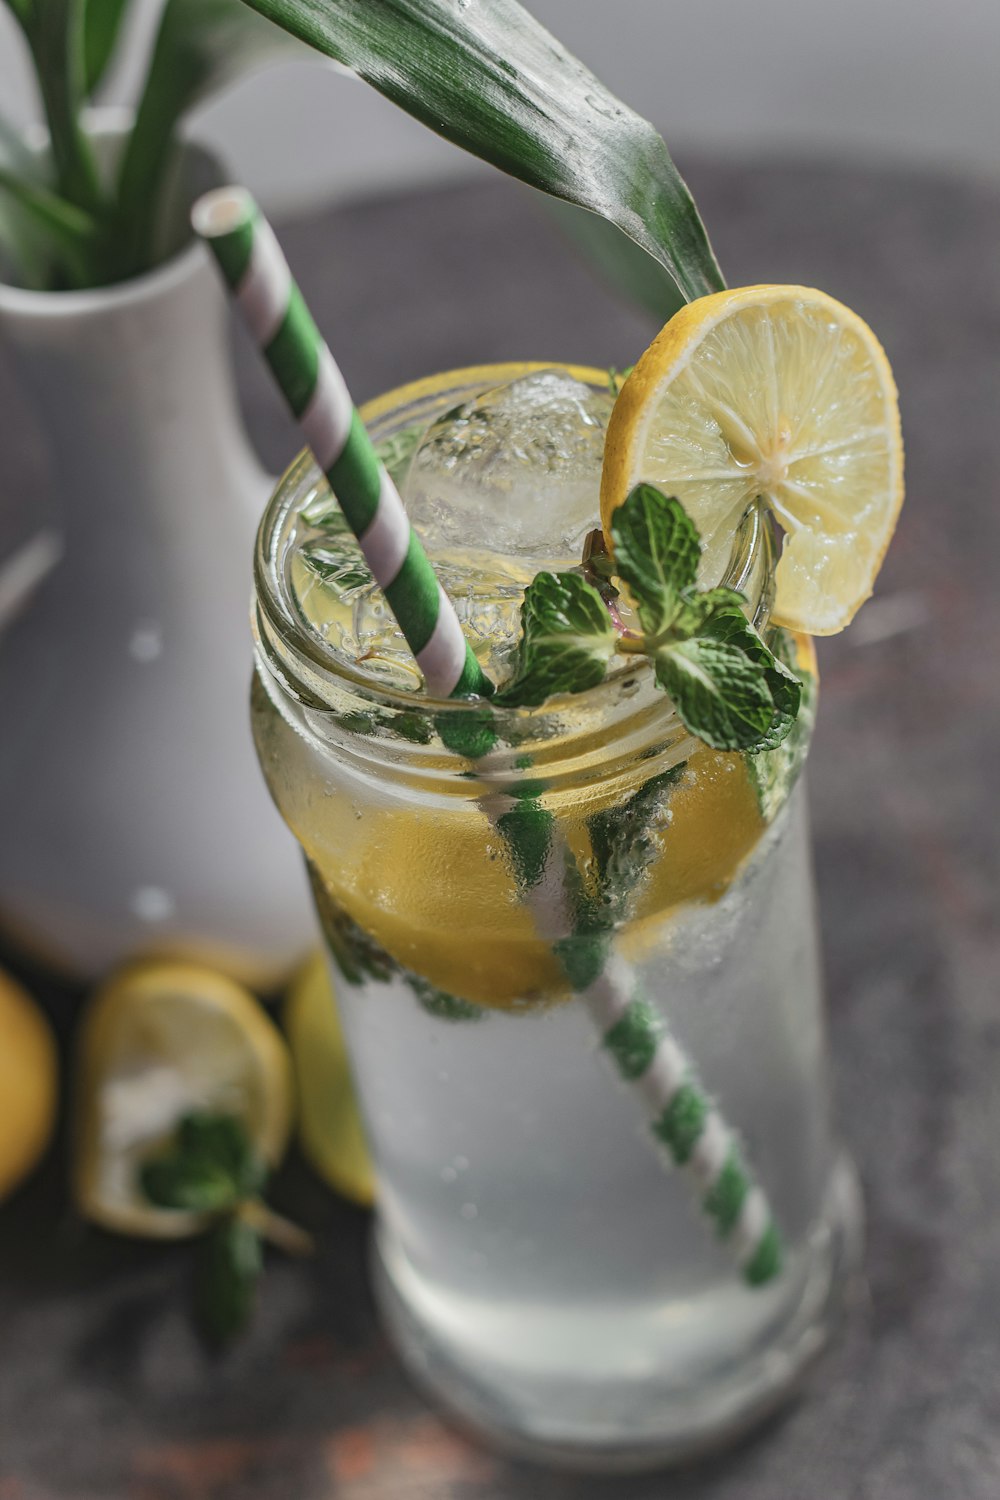 a glass of lemonade with a green and white striped straw